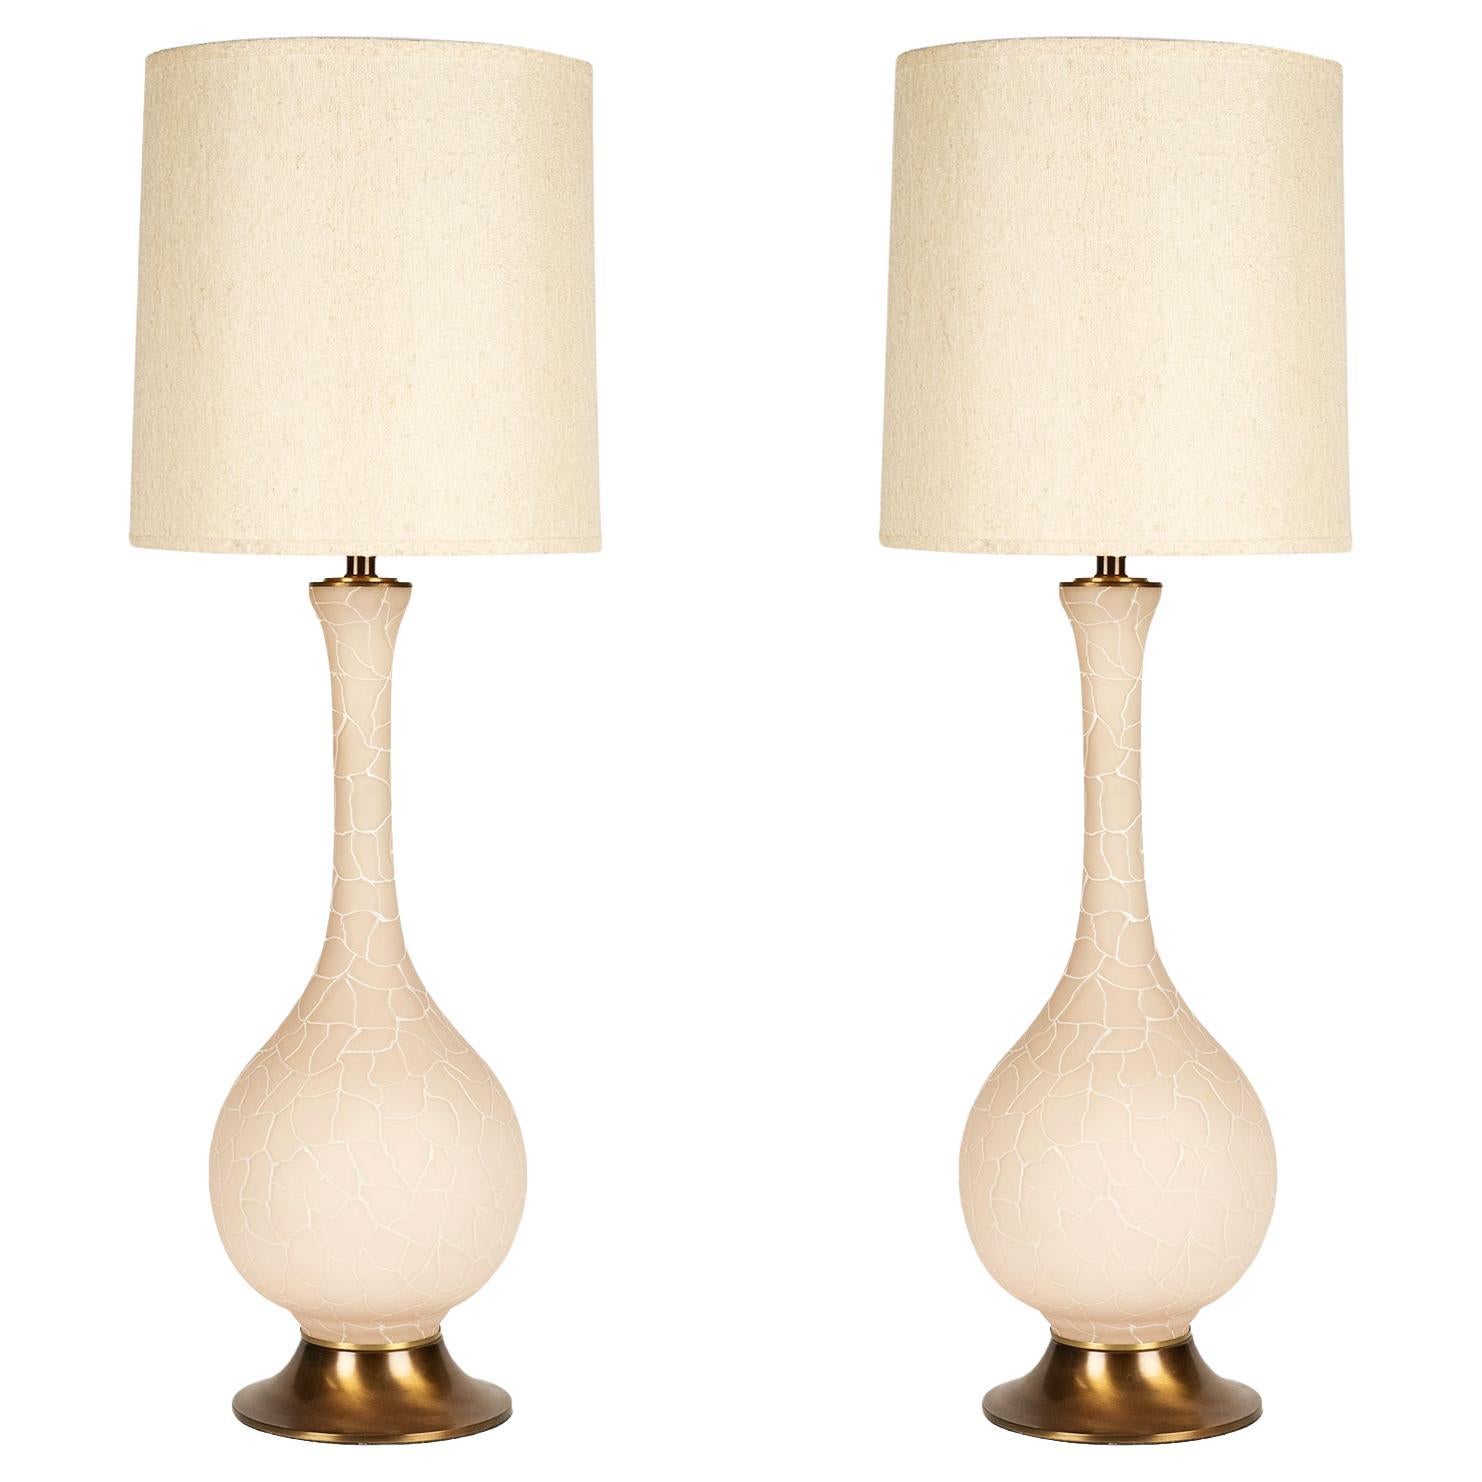 Pair Of Ceramic Italian Made Table Lamps For Sale